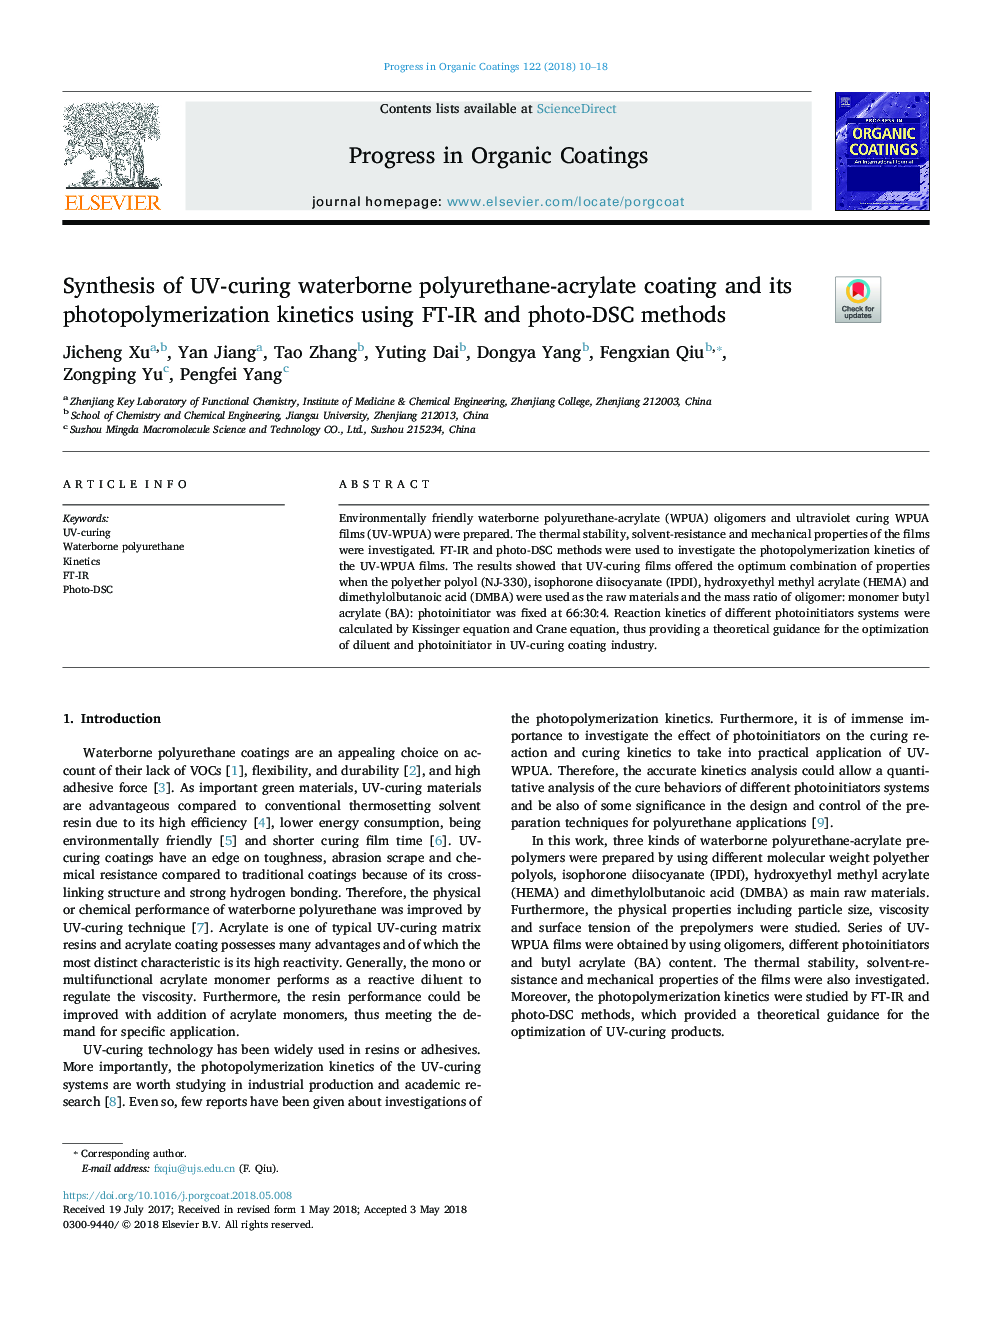 Synthesis of UV-curing waterborne polyurethane-acrylate coating and its photopolymerization kinetics using FT-IR and photo-DSC methods